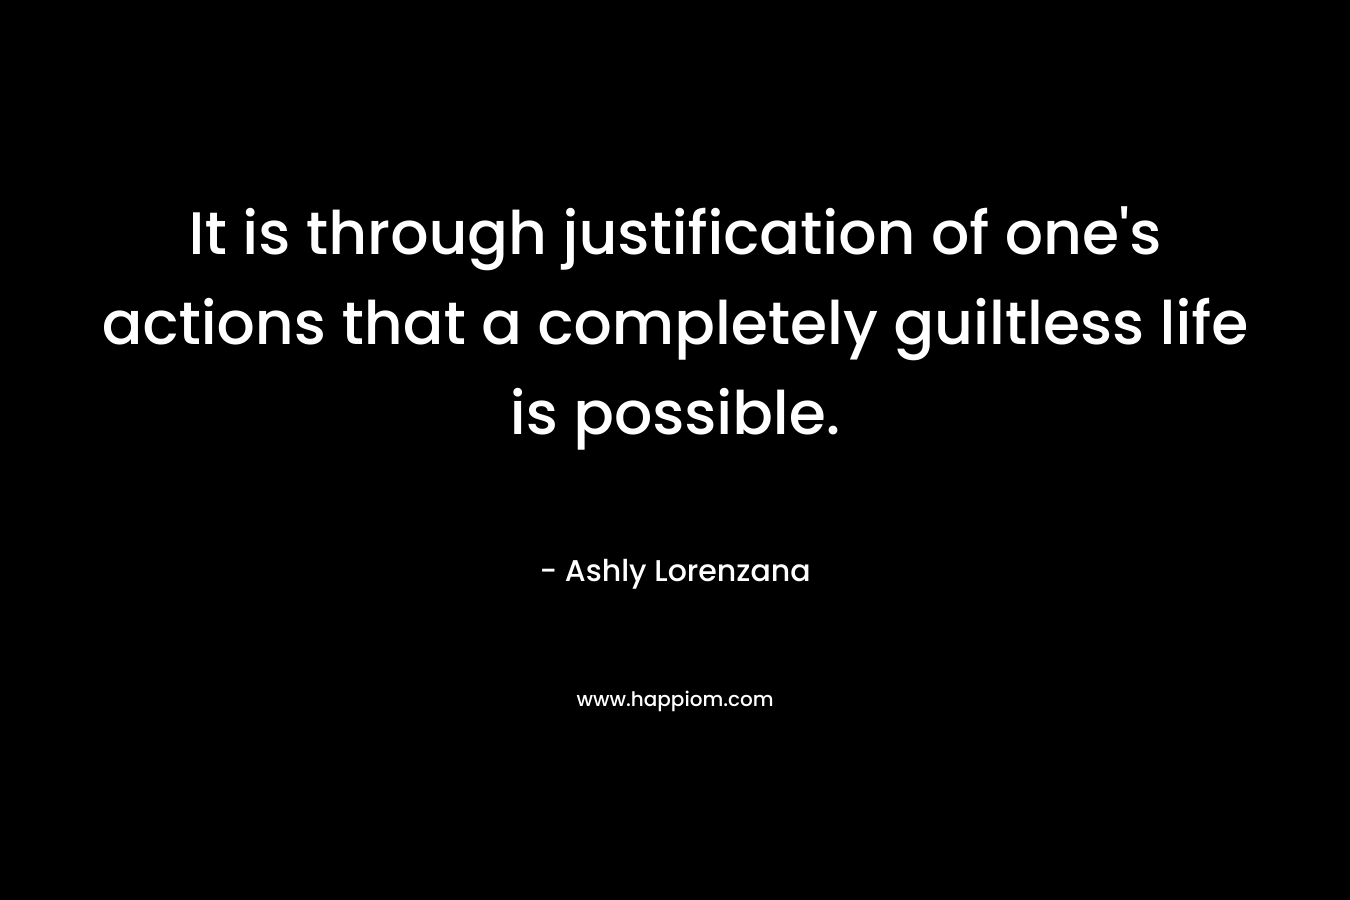 It is through justification of one’s actions that a completely guiltless life is possible. – Ashly Lorenzana